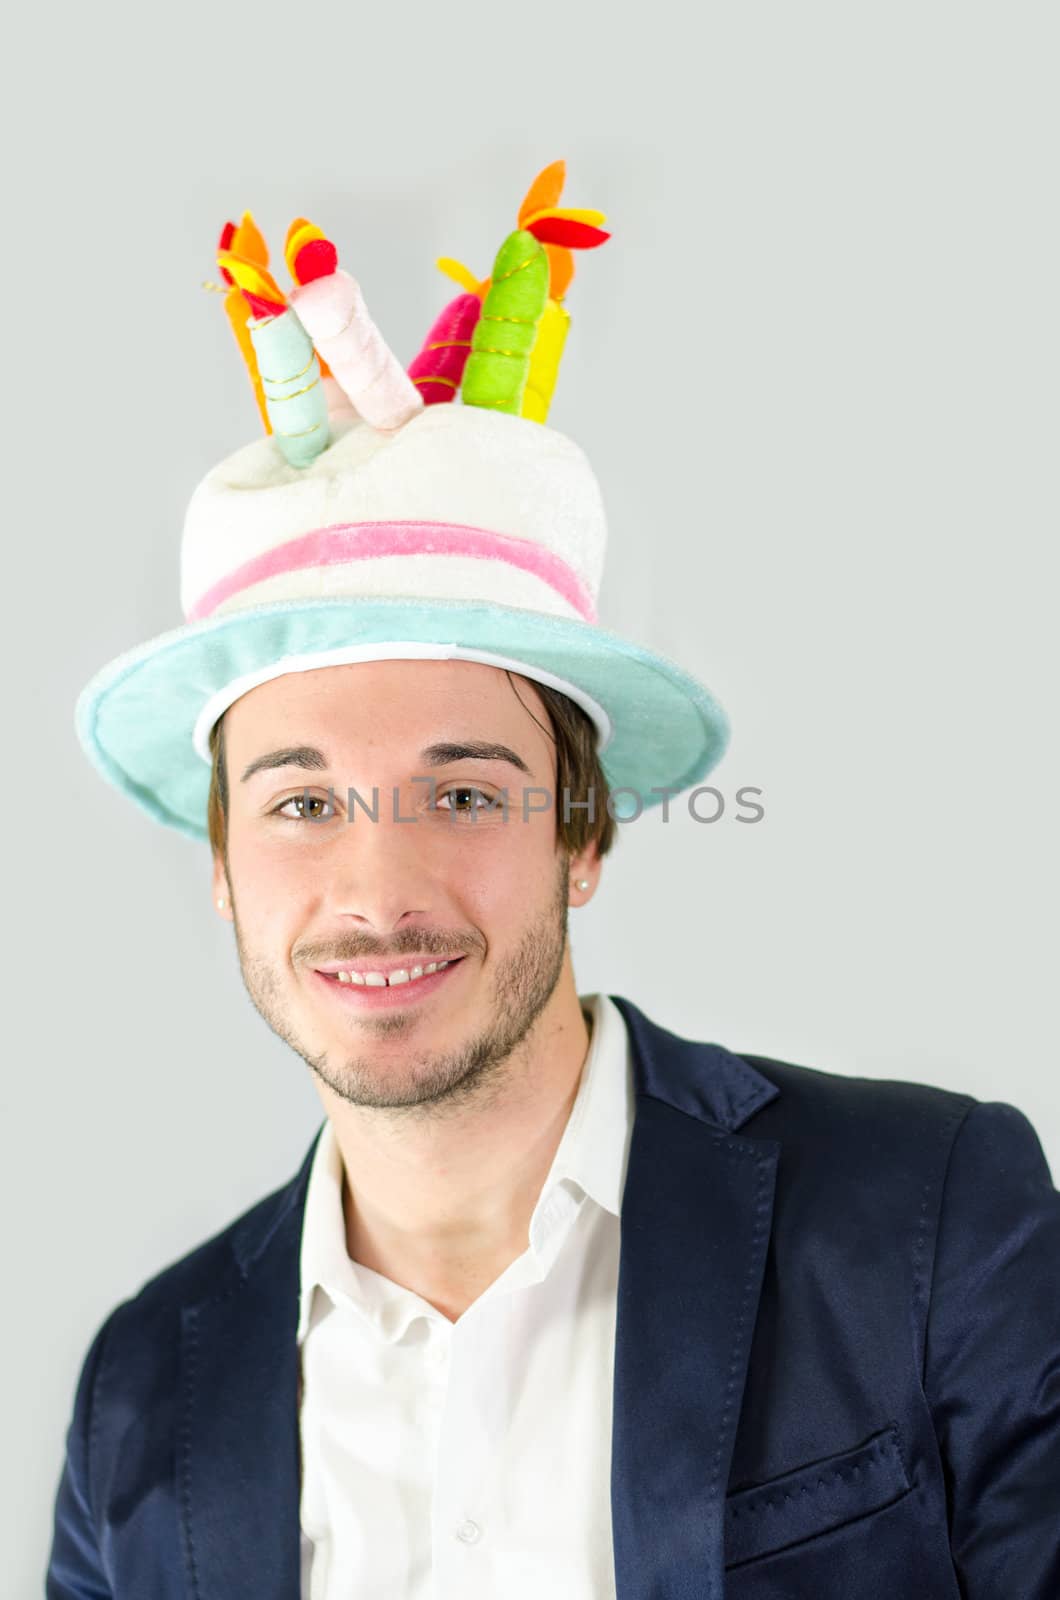 Smiling, cute guy with funny birthday cake hat by artofphoto